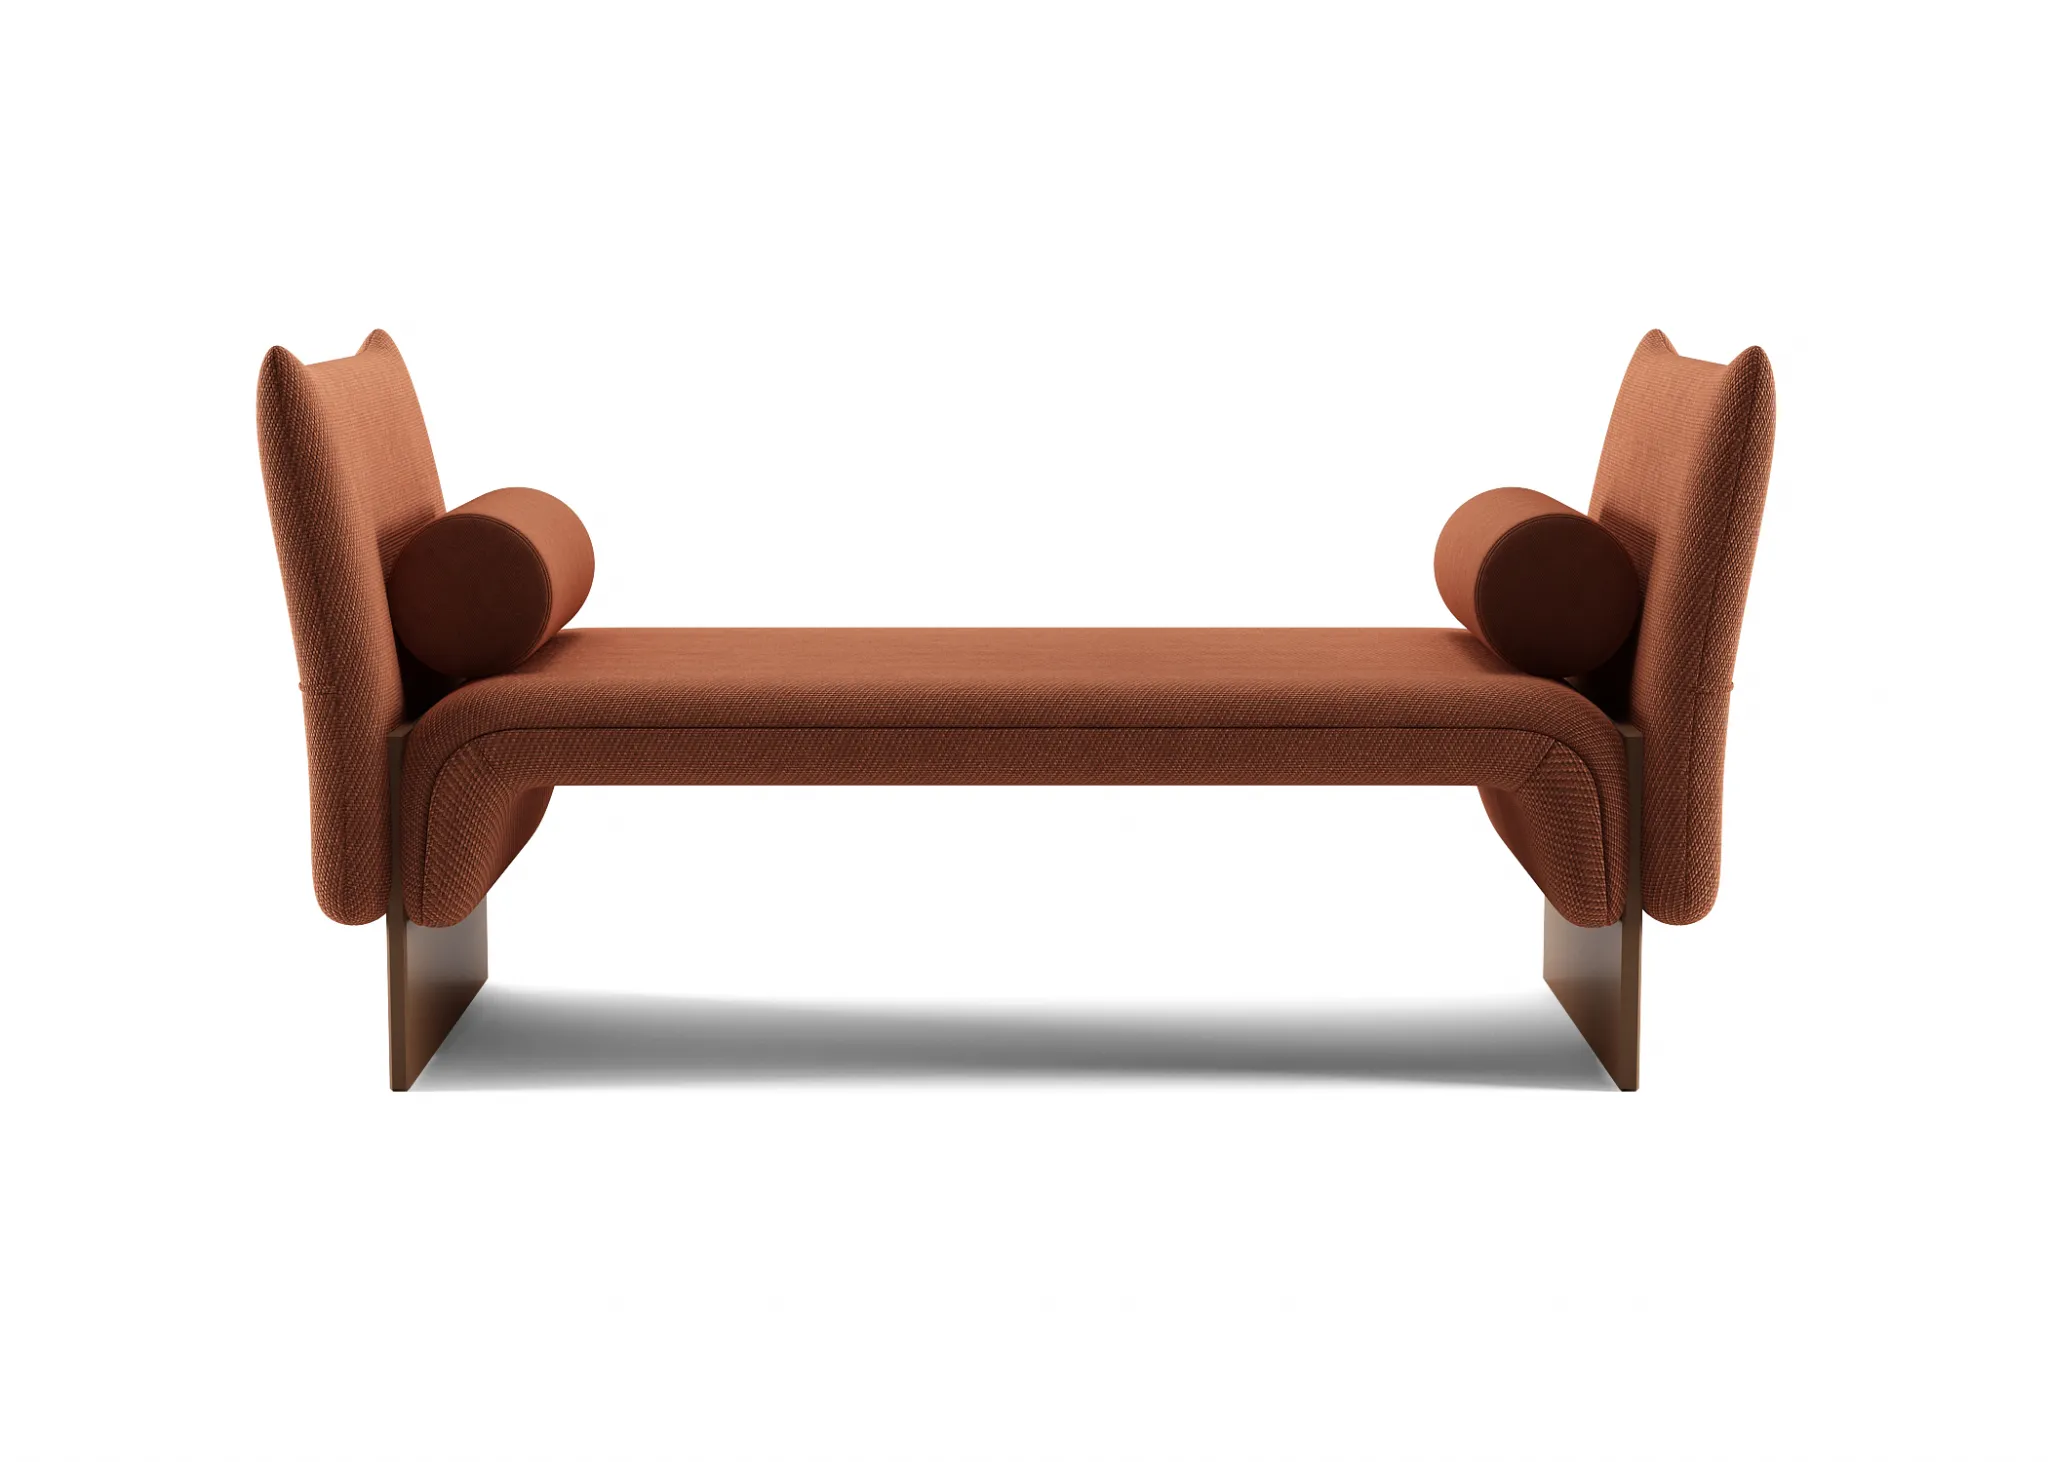 FURNITURE 3D MODELS – CHAIRS – 0266